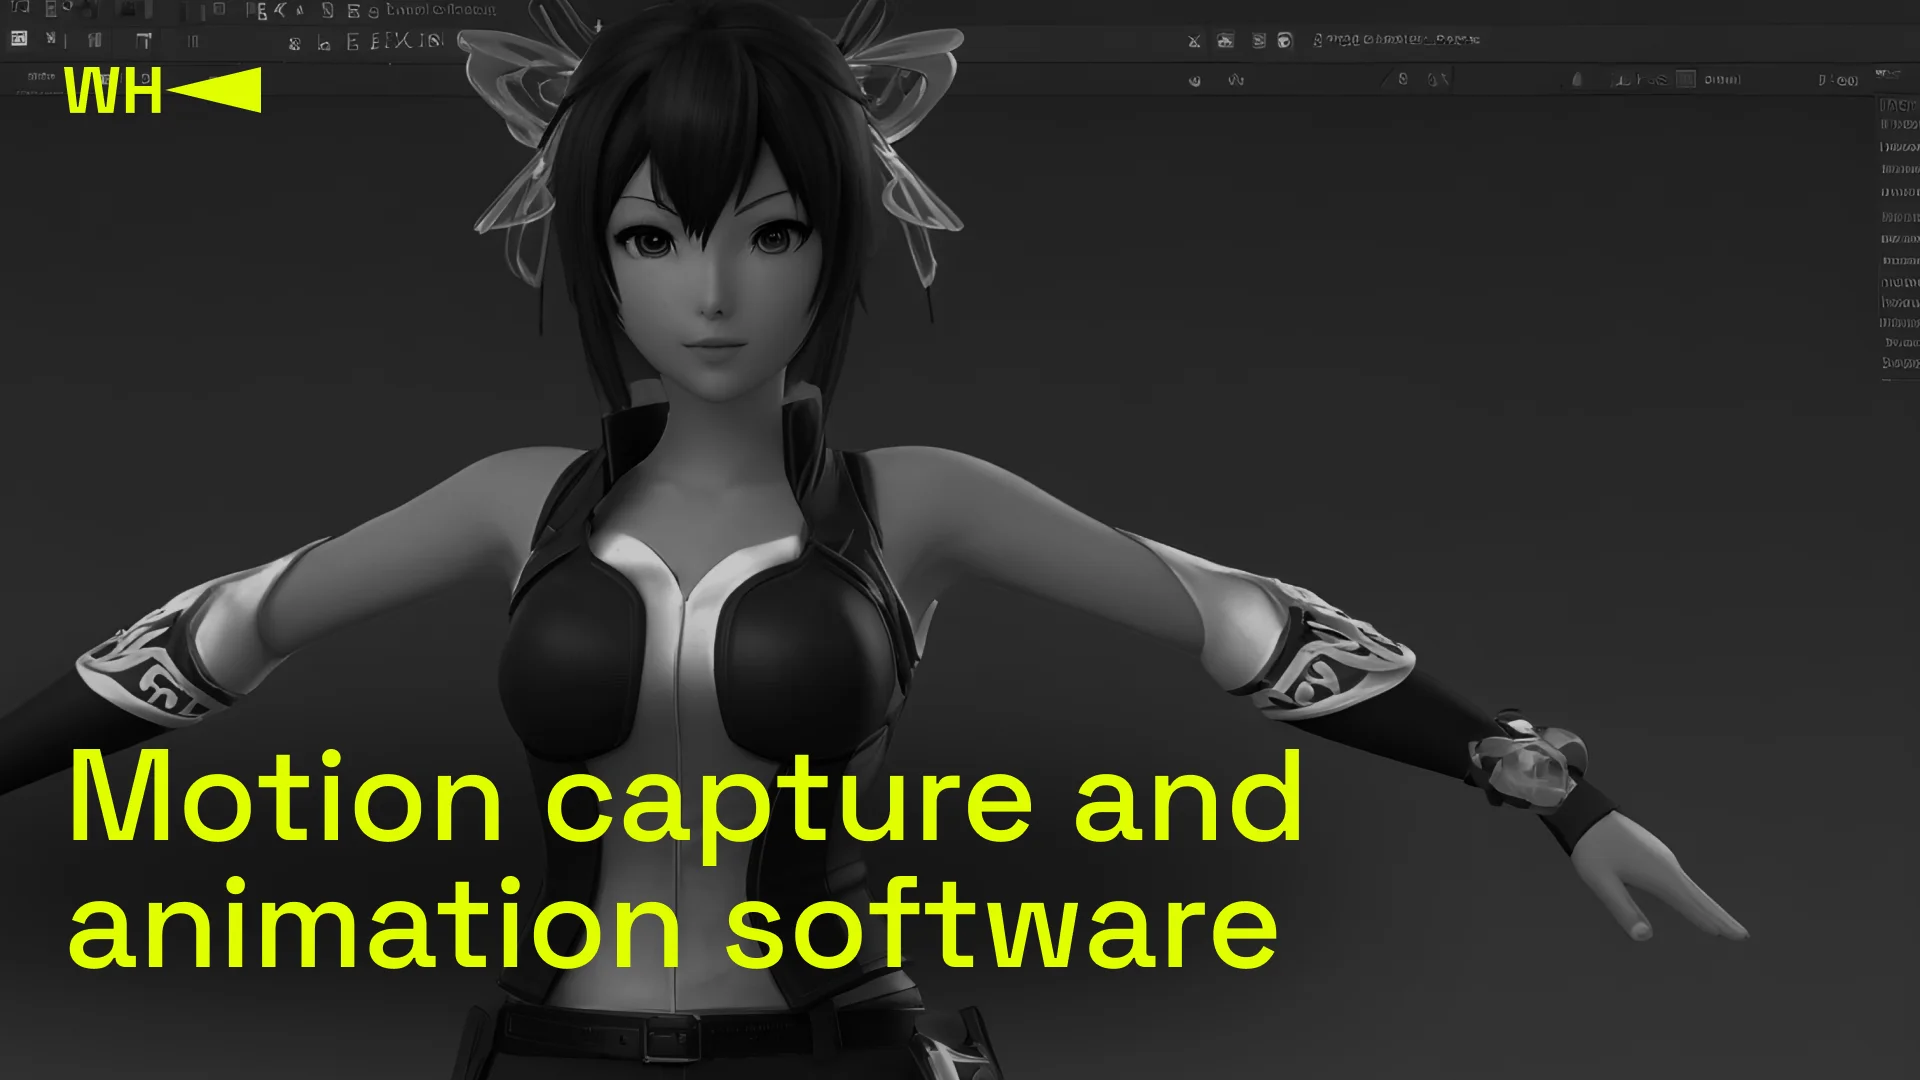 Motion capture and animation software. Credit: WePlay Holding